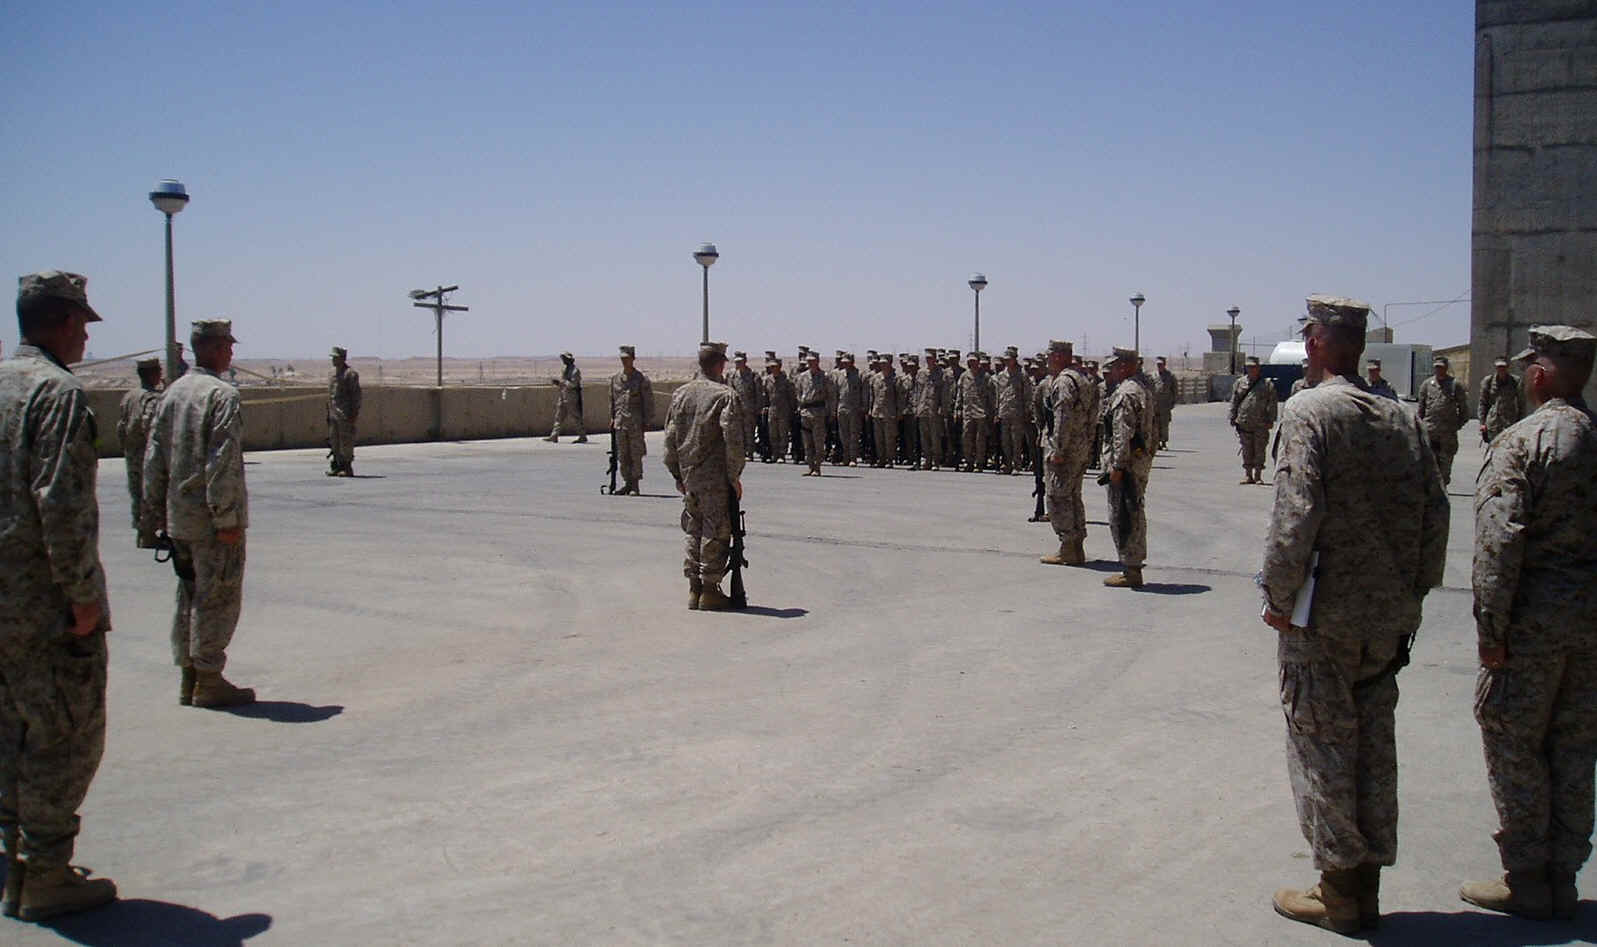 LtCol Brandl and SgtMajor Hope uncase the Battalion Colors at  Haditha Dam, as 1st Bn, 8th Marines relieves 3rd  Bn, 4th Marines in Al Anbar Province, Iraq.